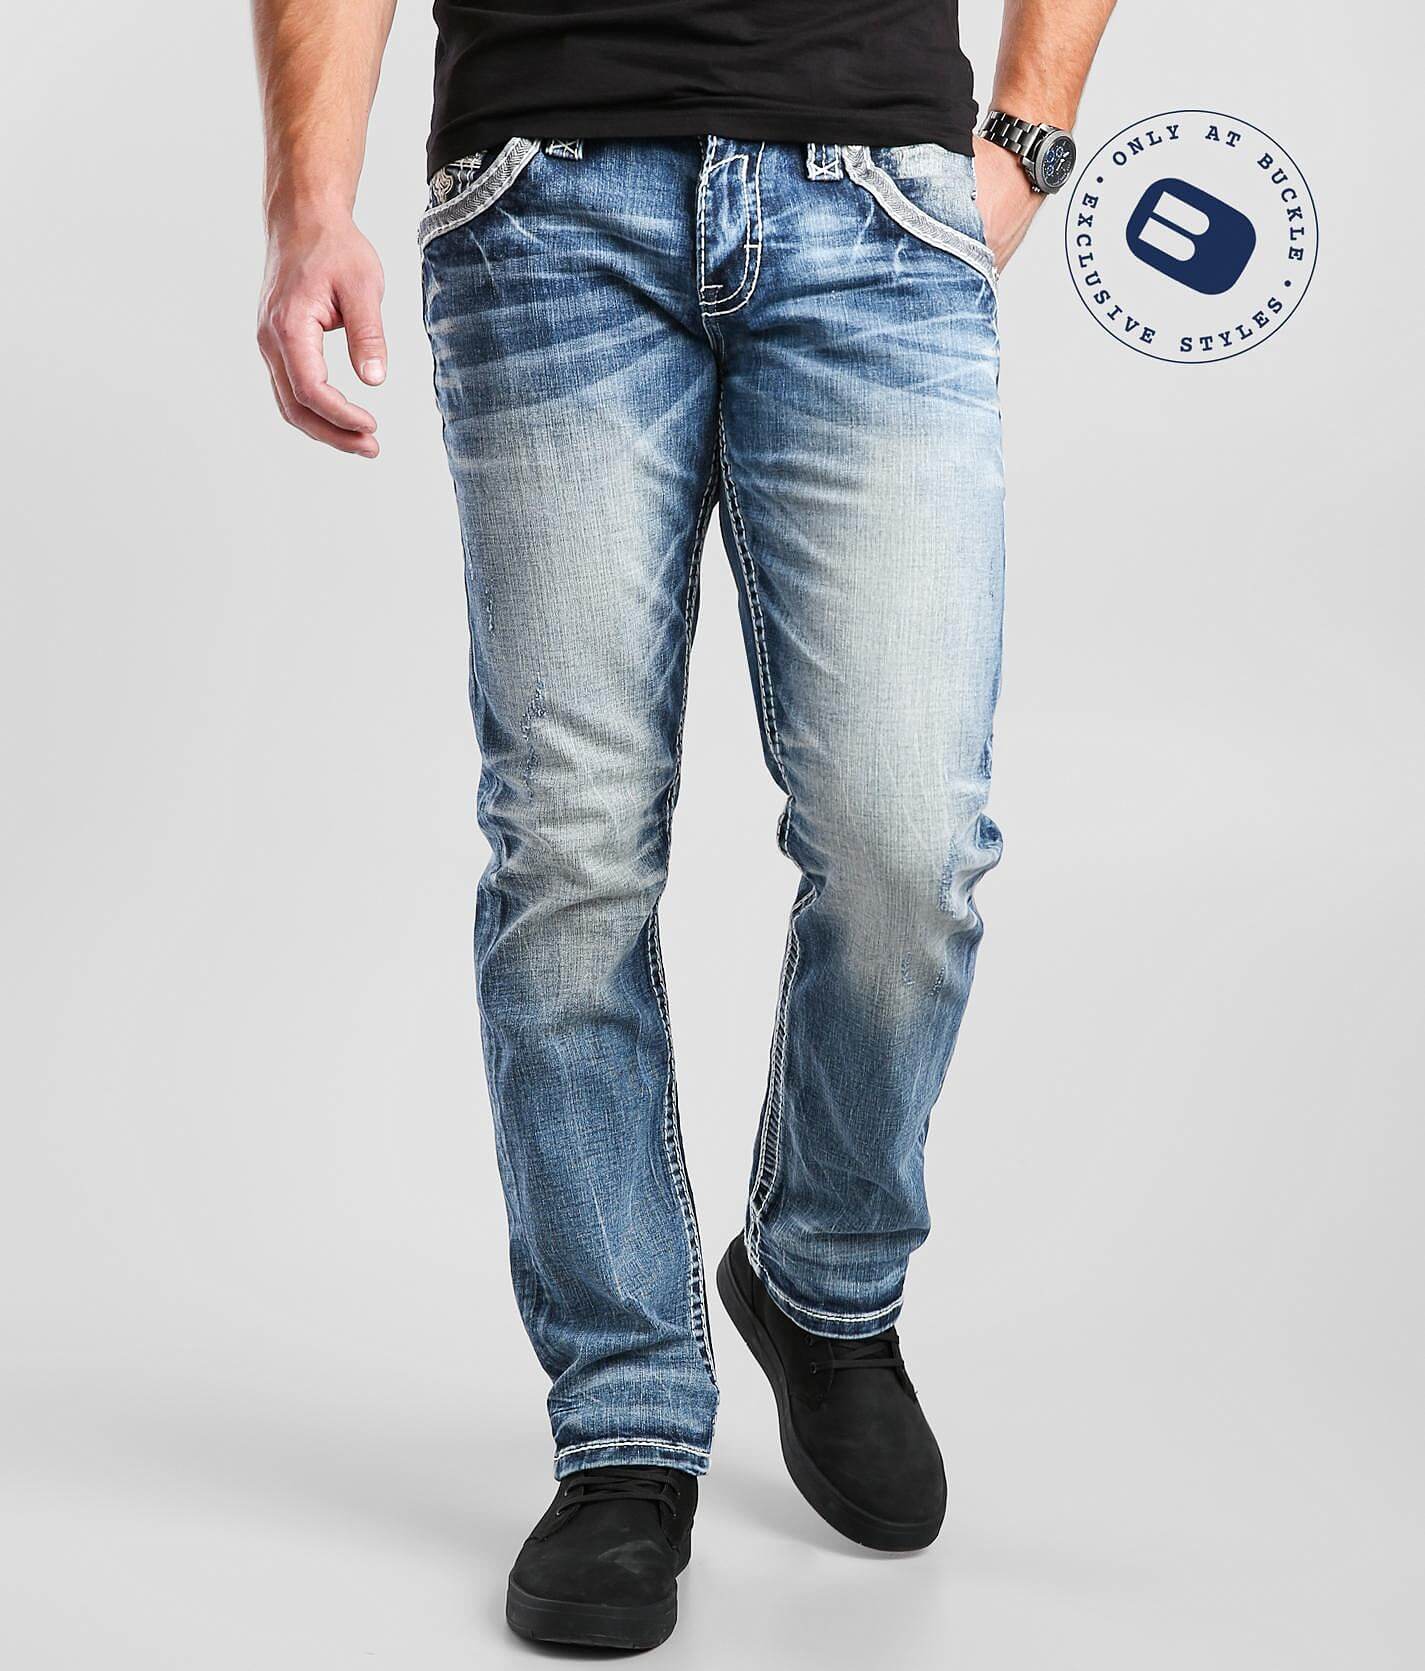 buckle jeans mens